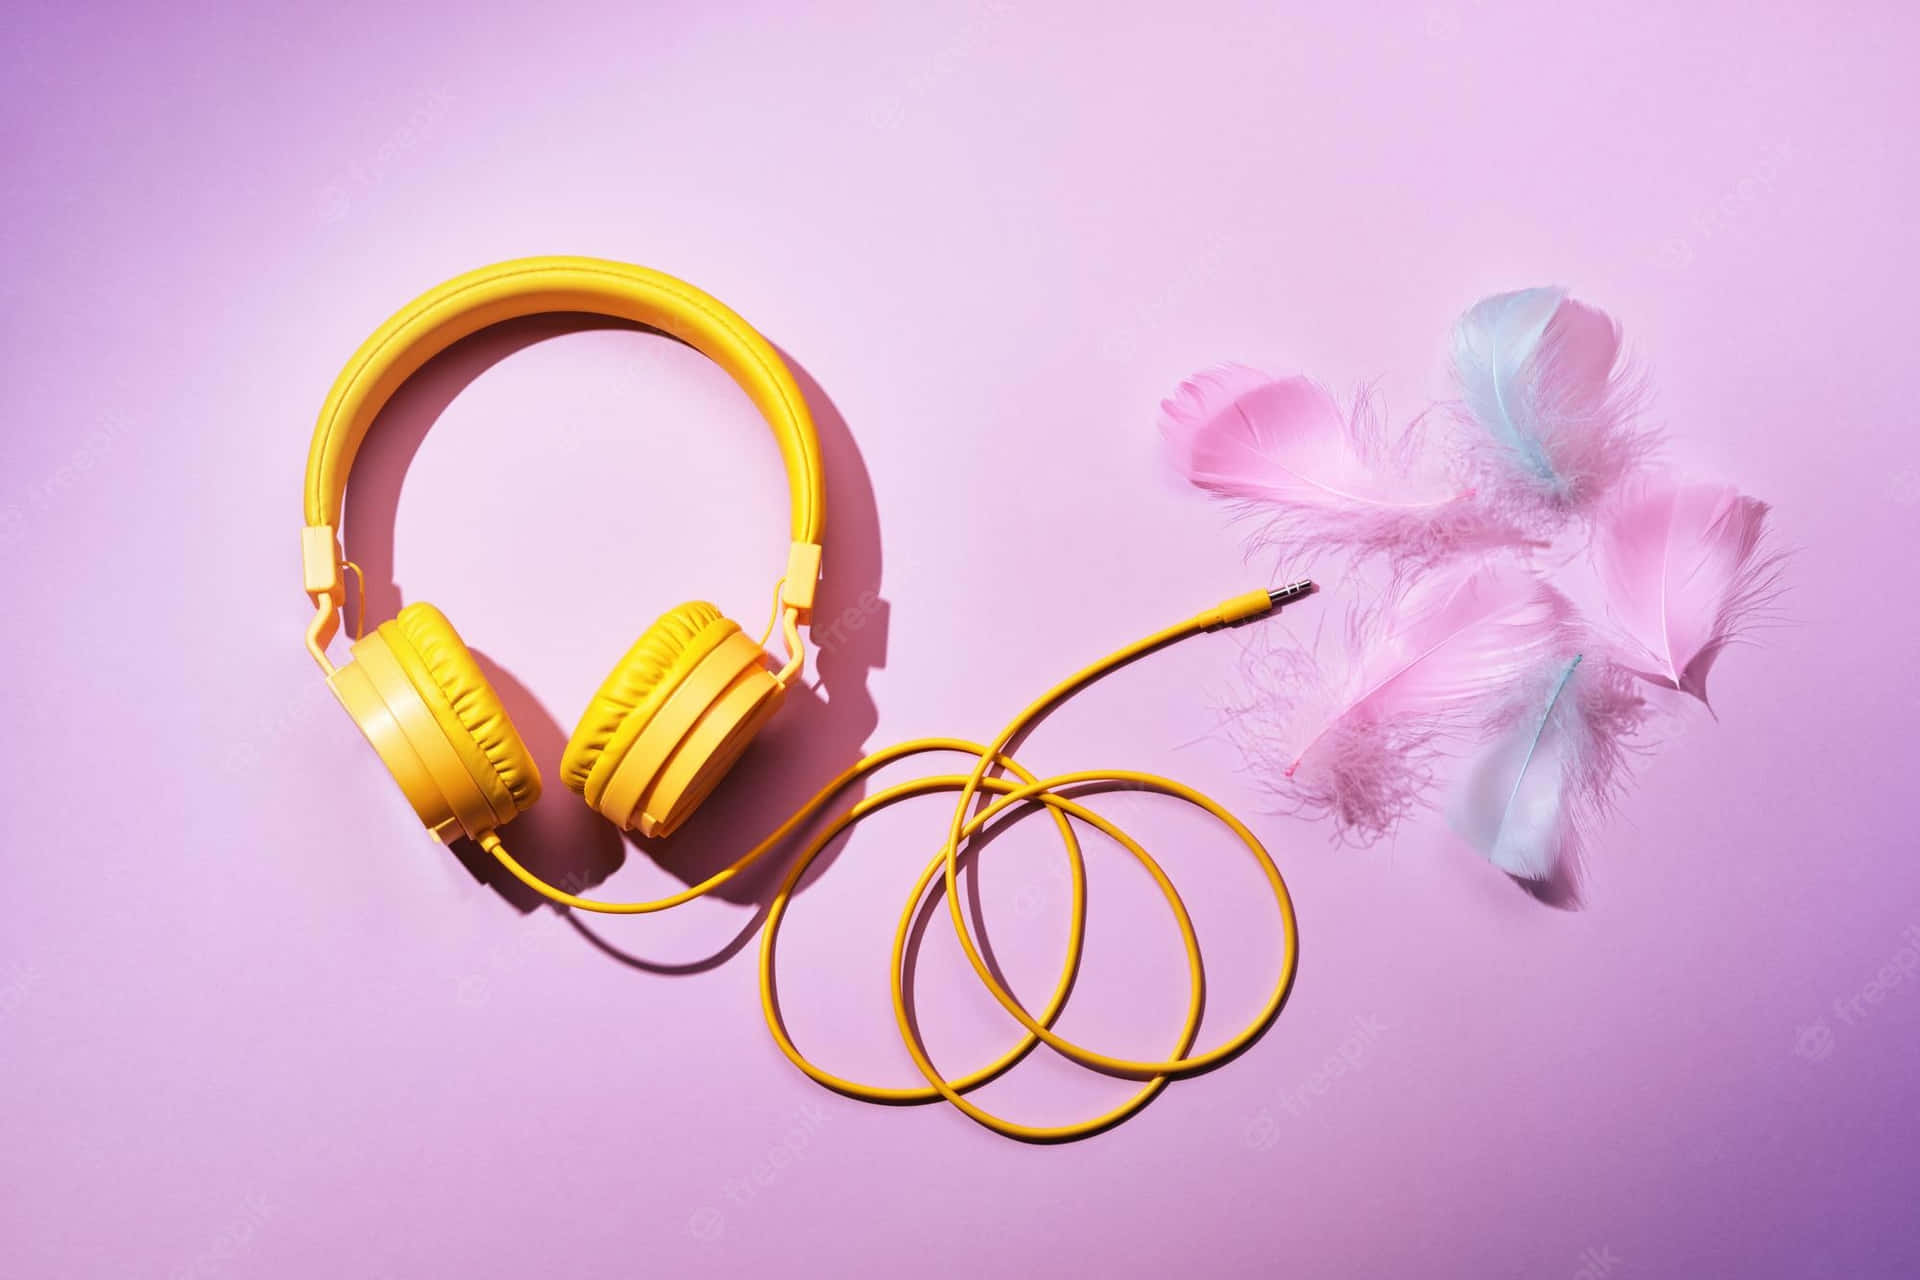 Yellow Headphones With Feathers On A Pink Background